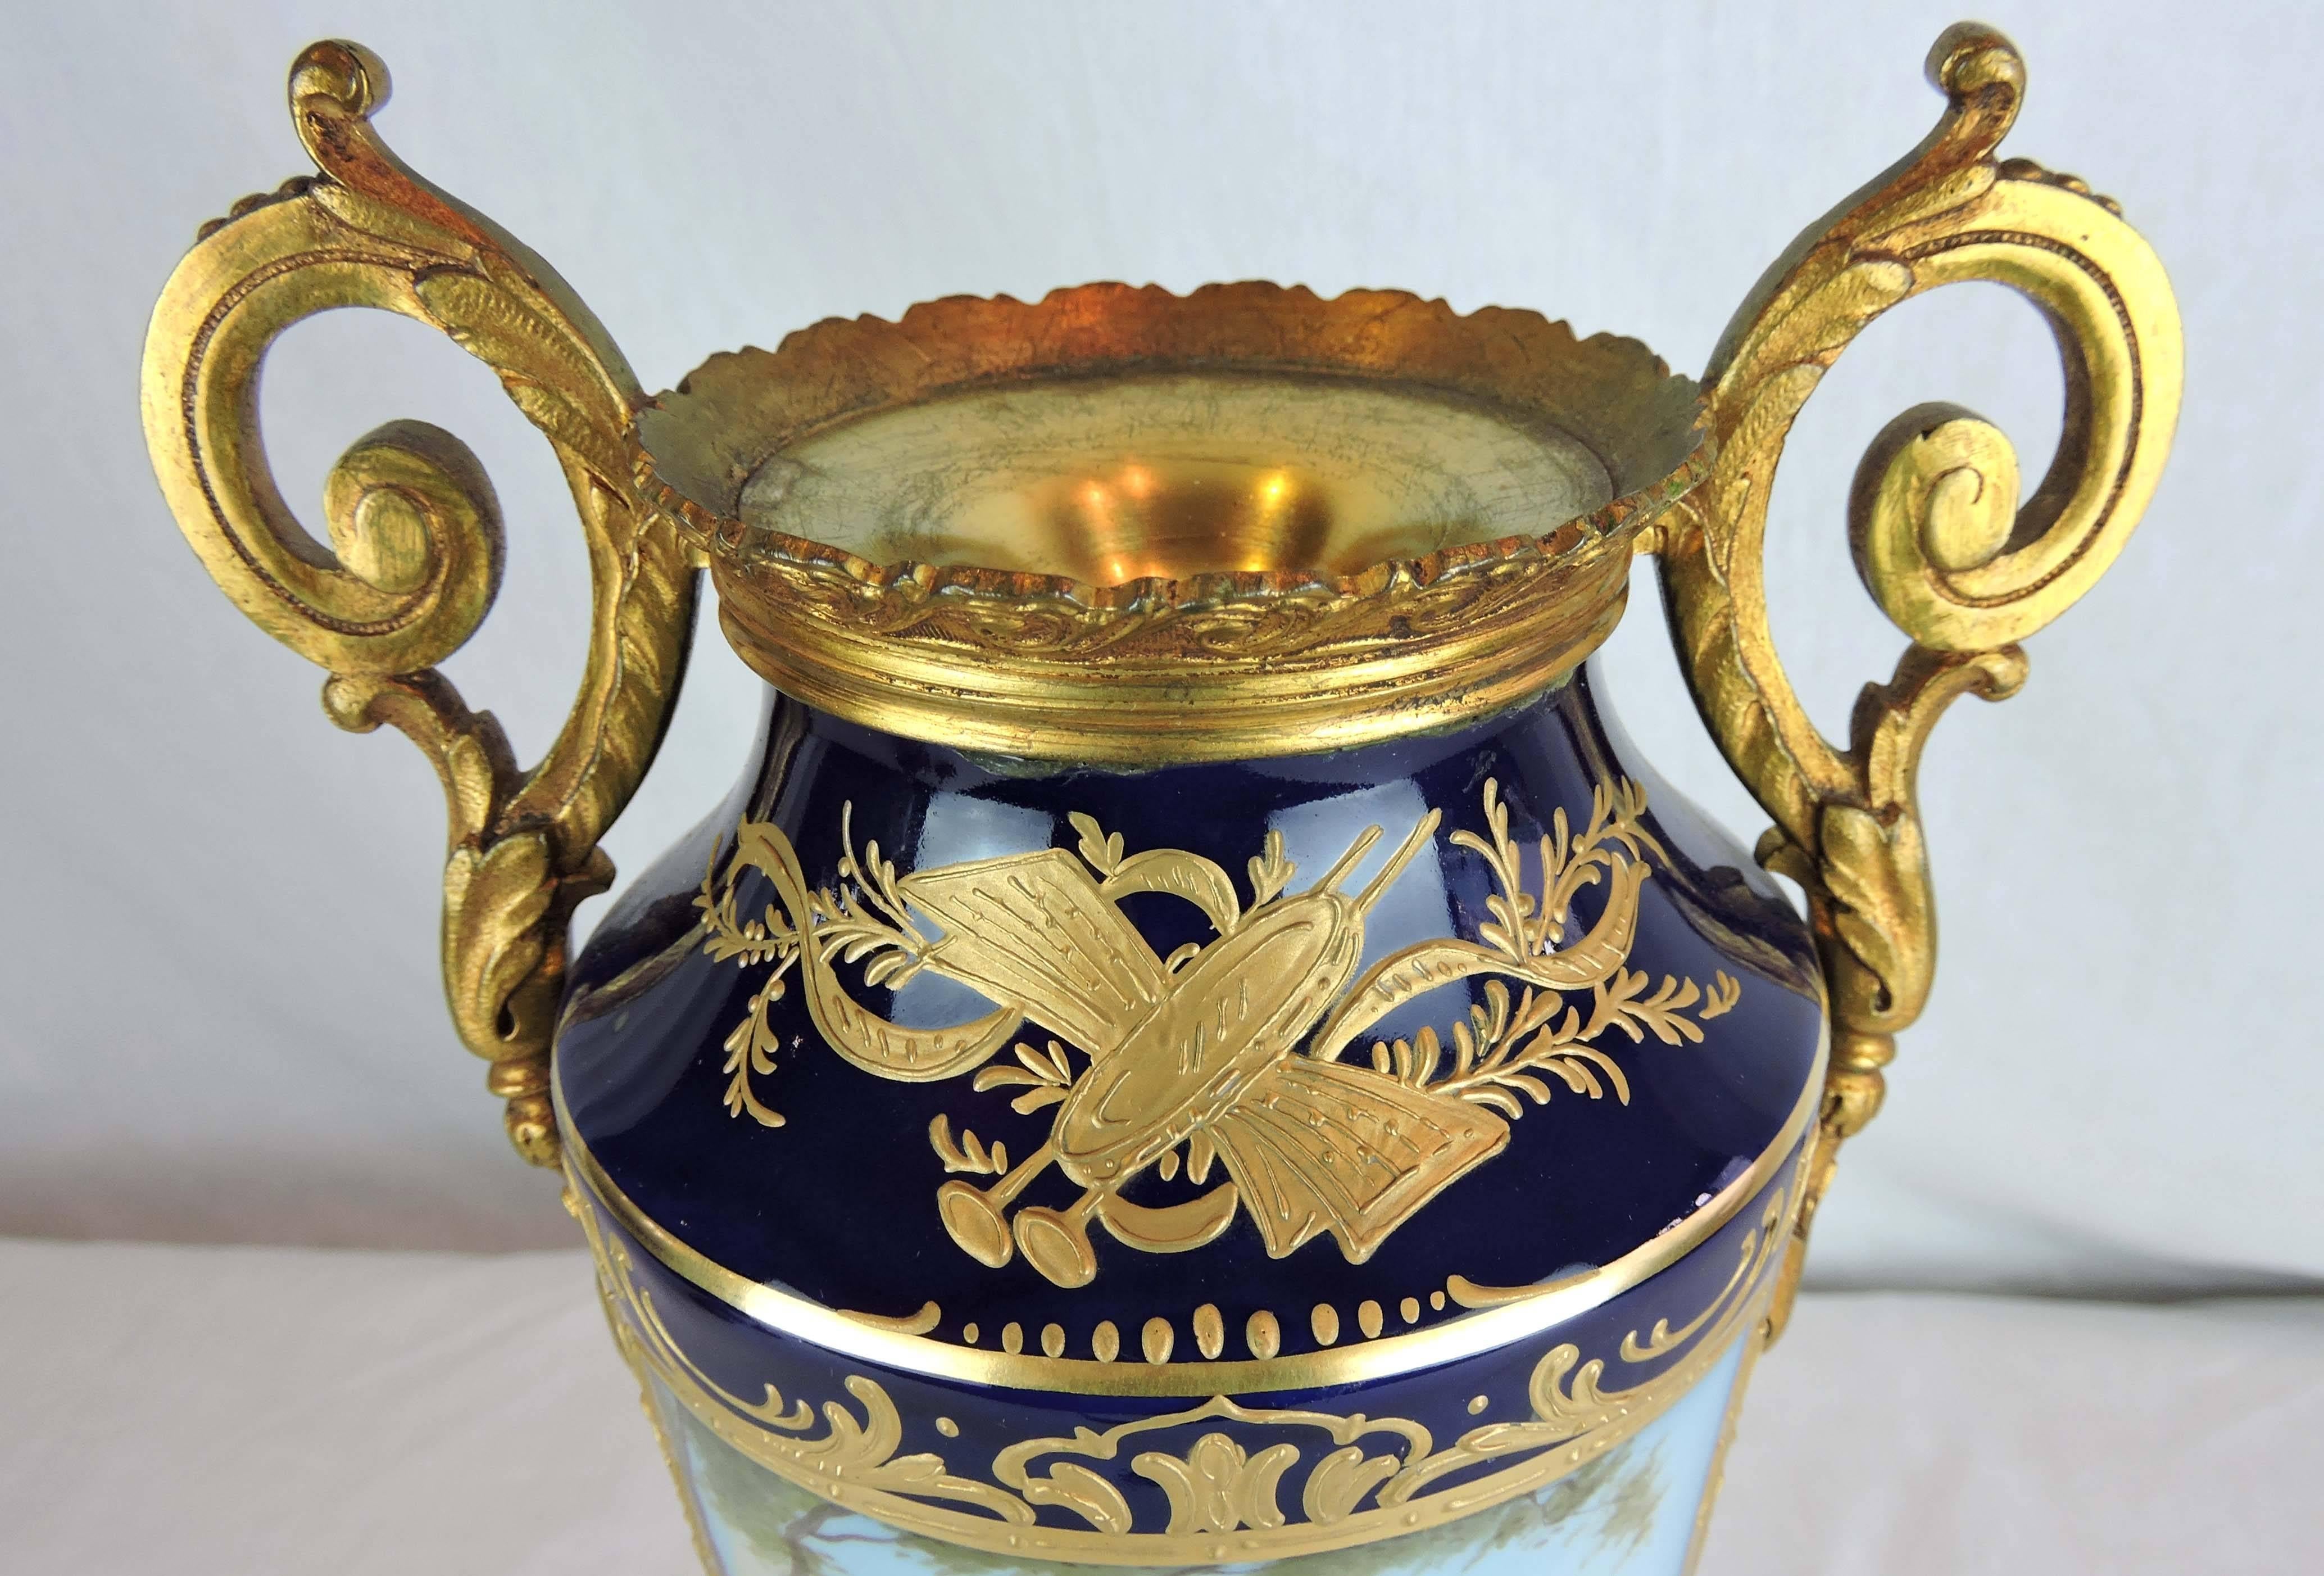 Pair of French Sevres Style Porcelain and Gilt Bronze Lidded Baluster Urns For Sale 2